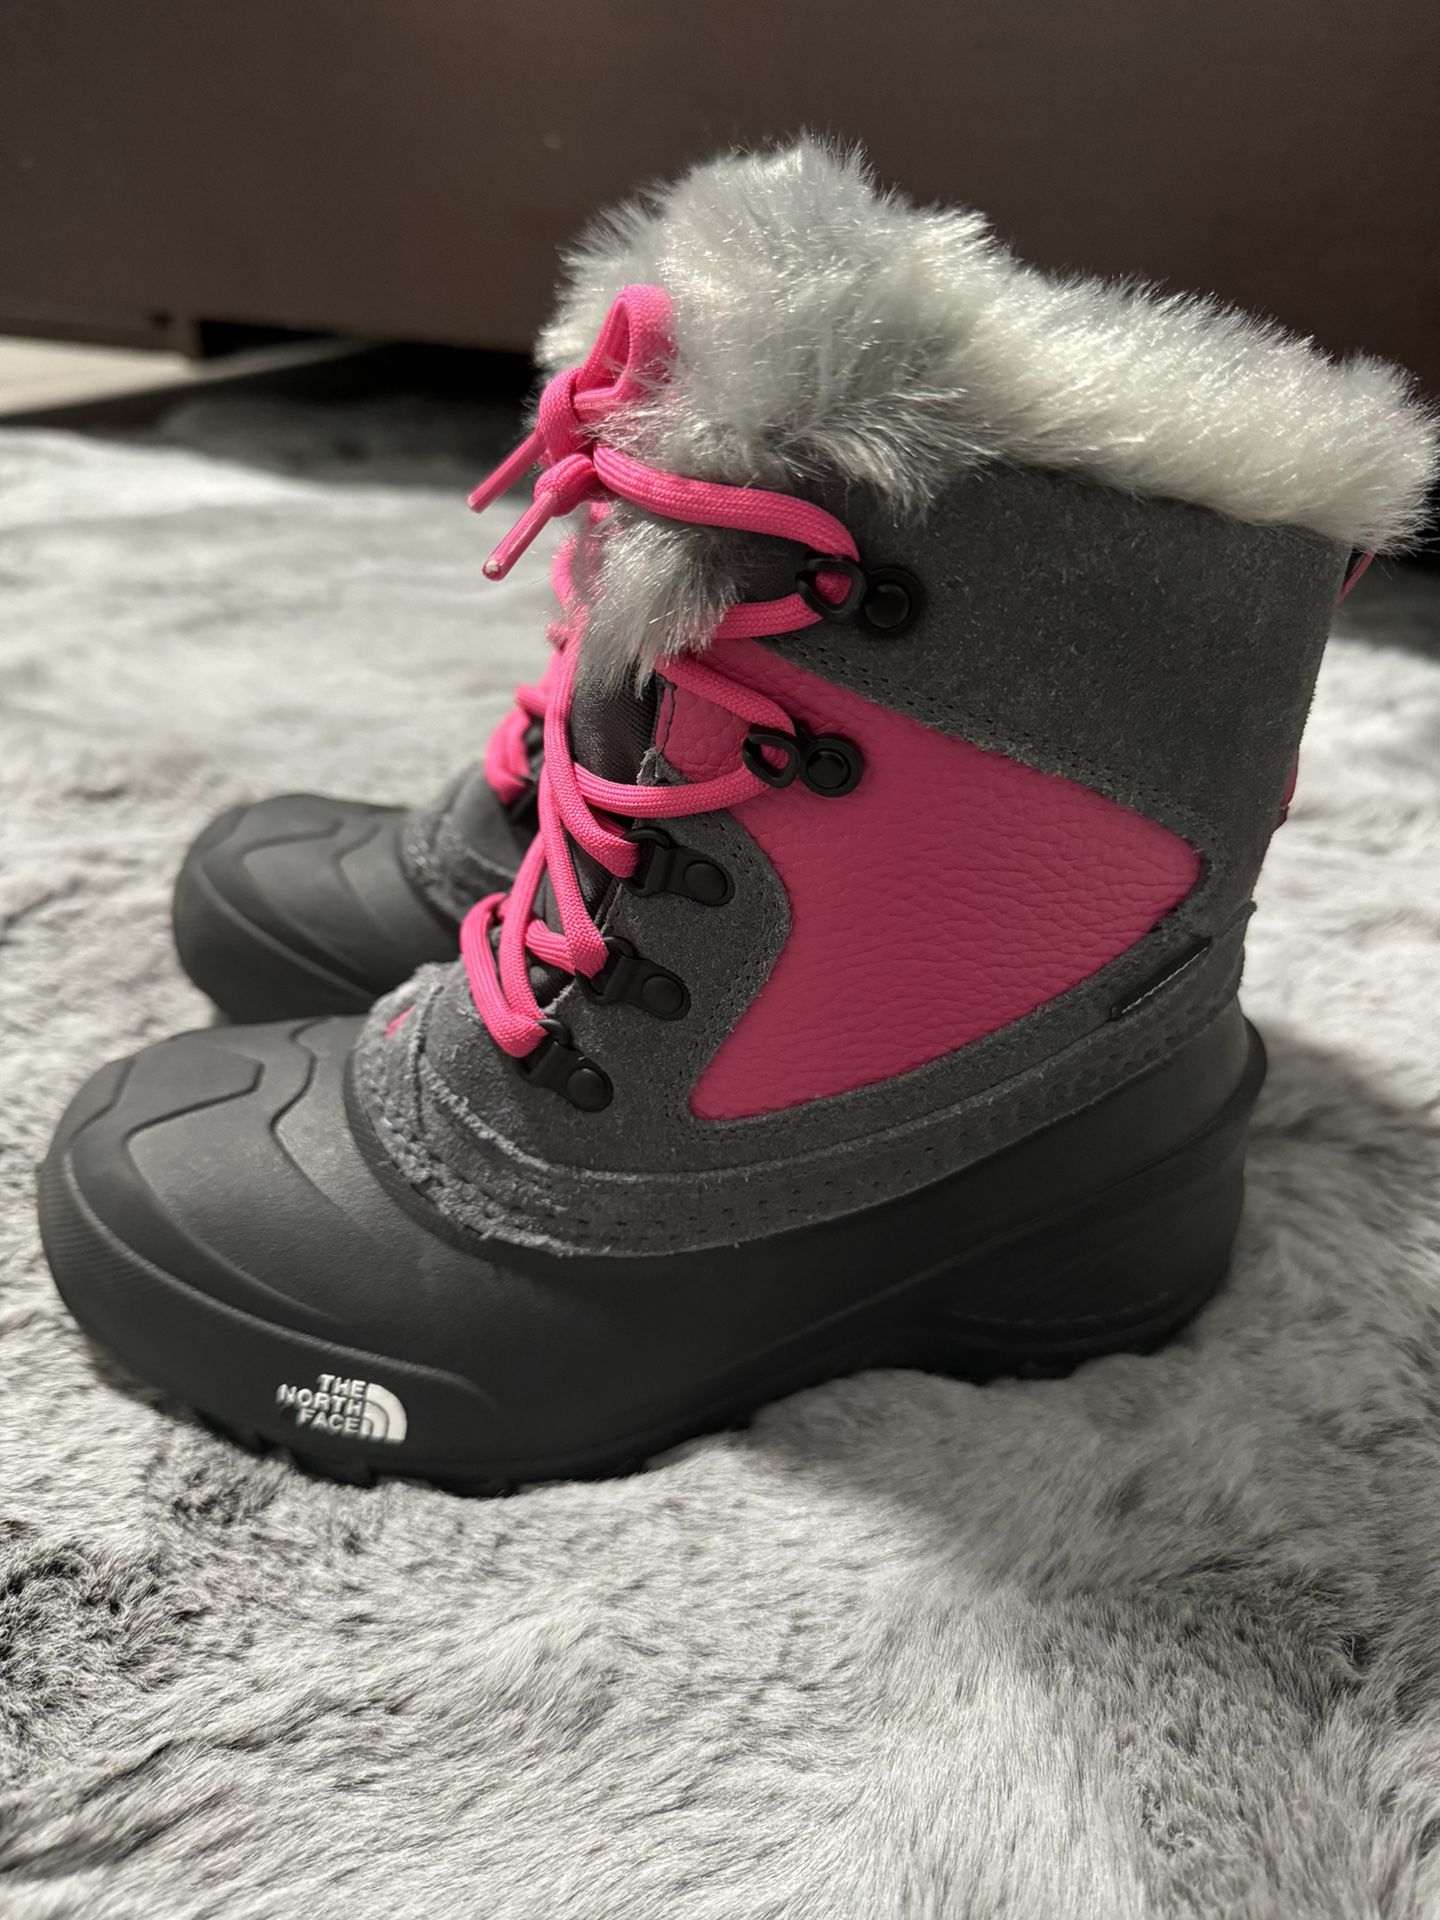 North face Snow Boots